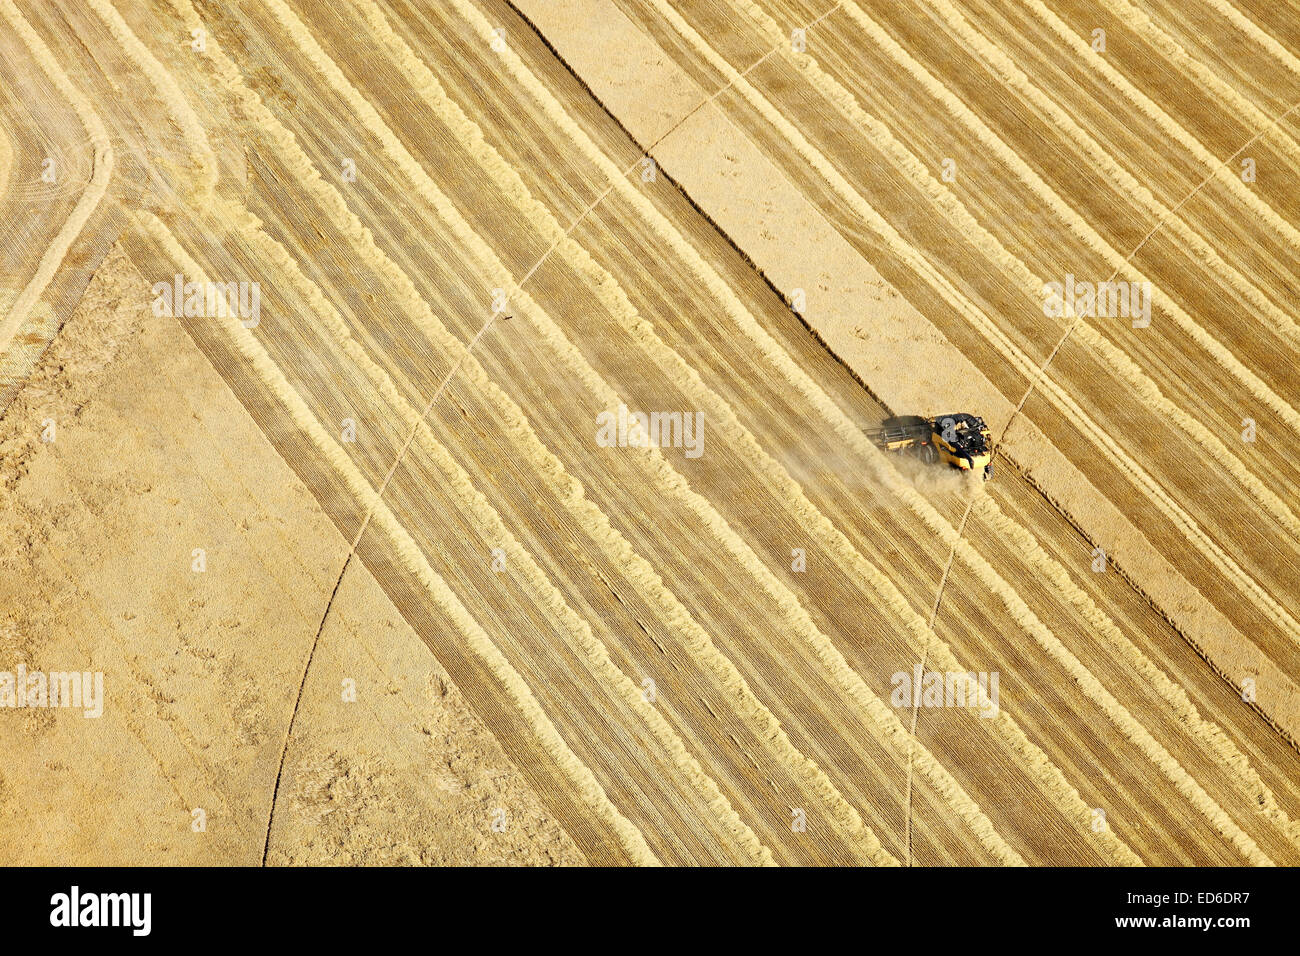 An aerial view of farm machinery in the field harvesting wheat Stock Photo